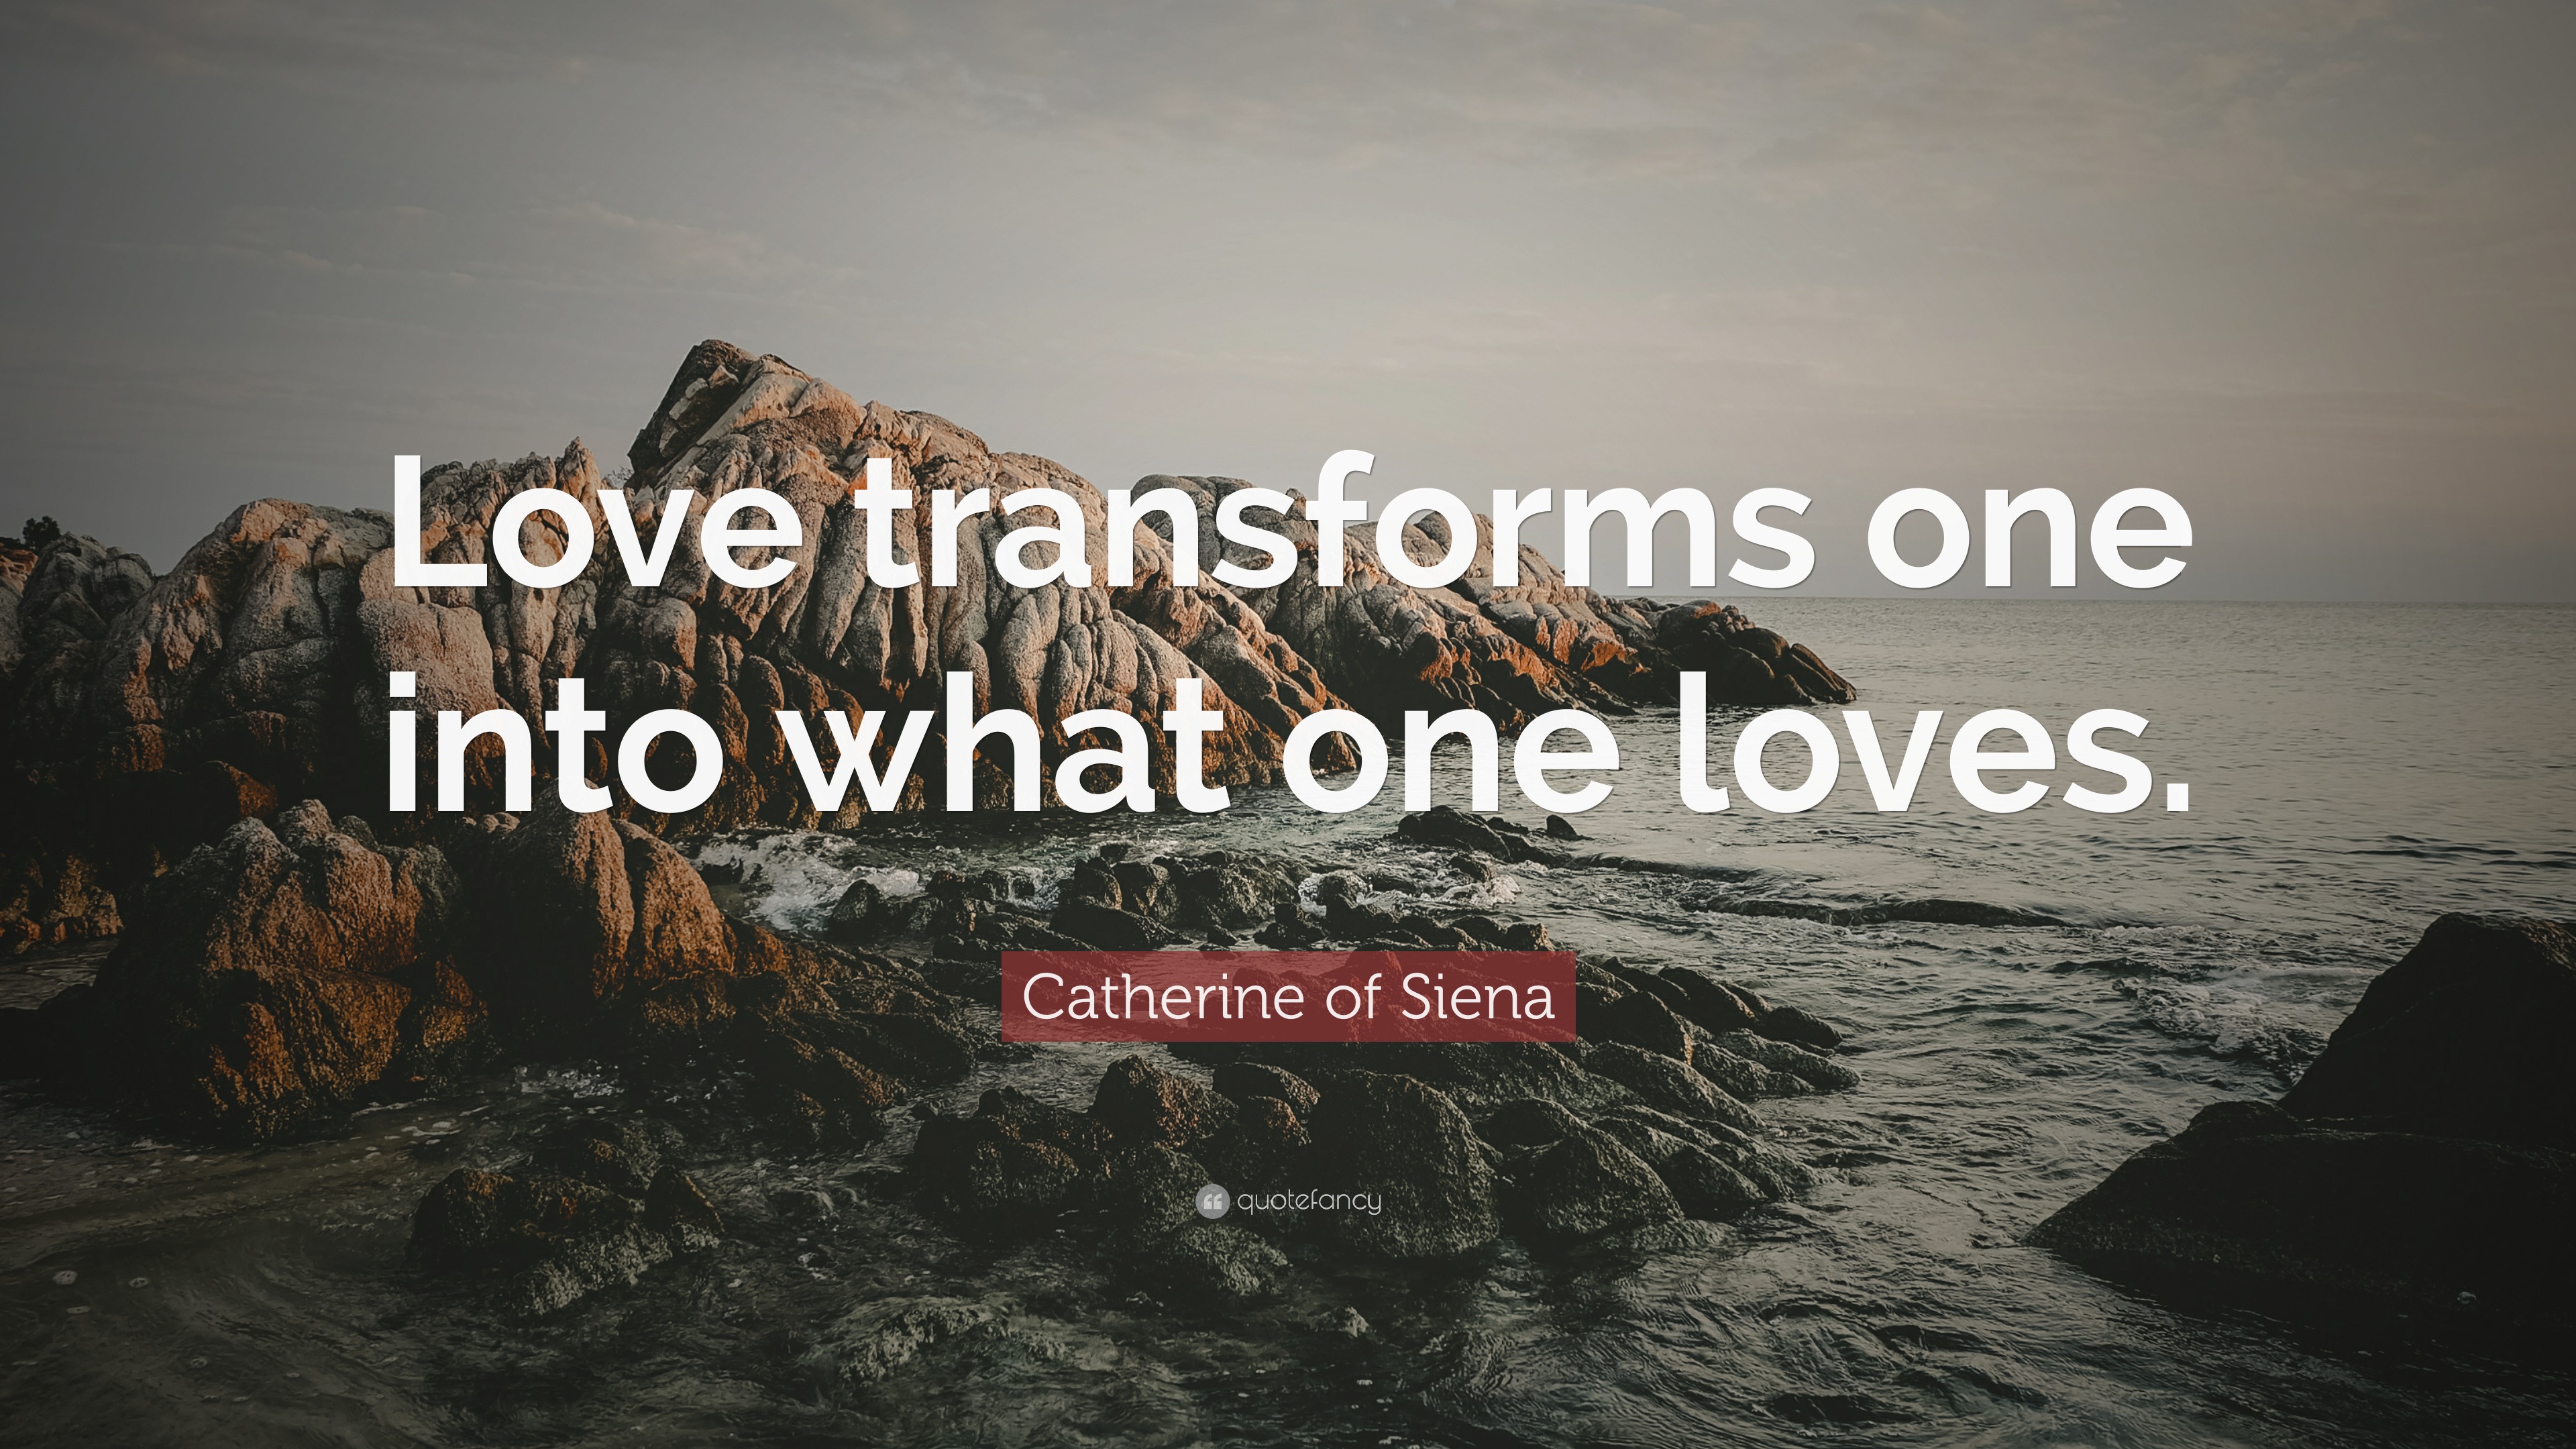 Catherine of Siena Quote: “Love transforms one into what one loves.”